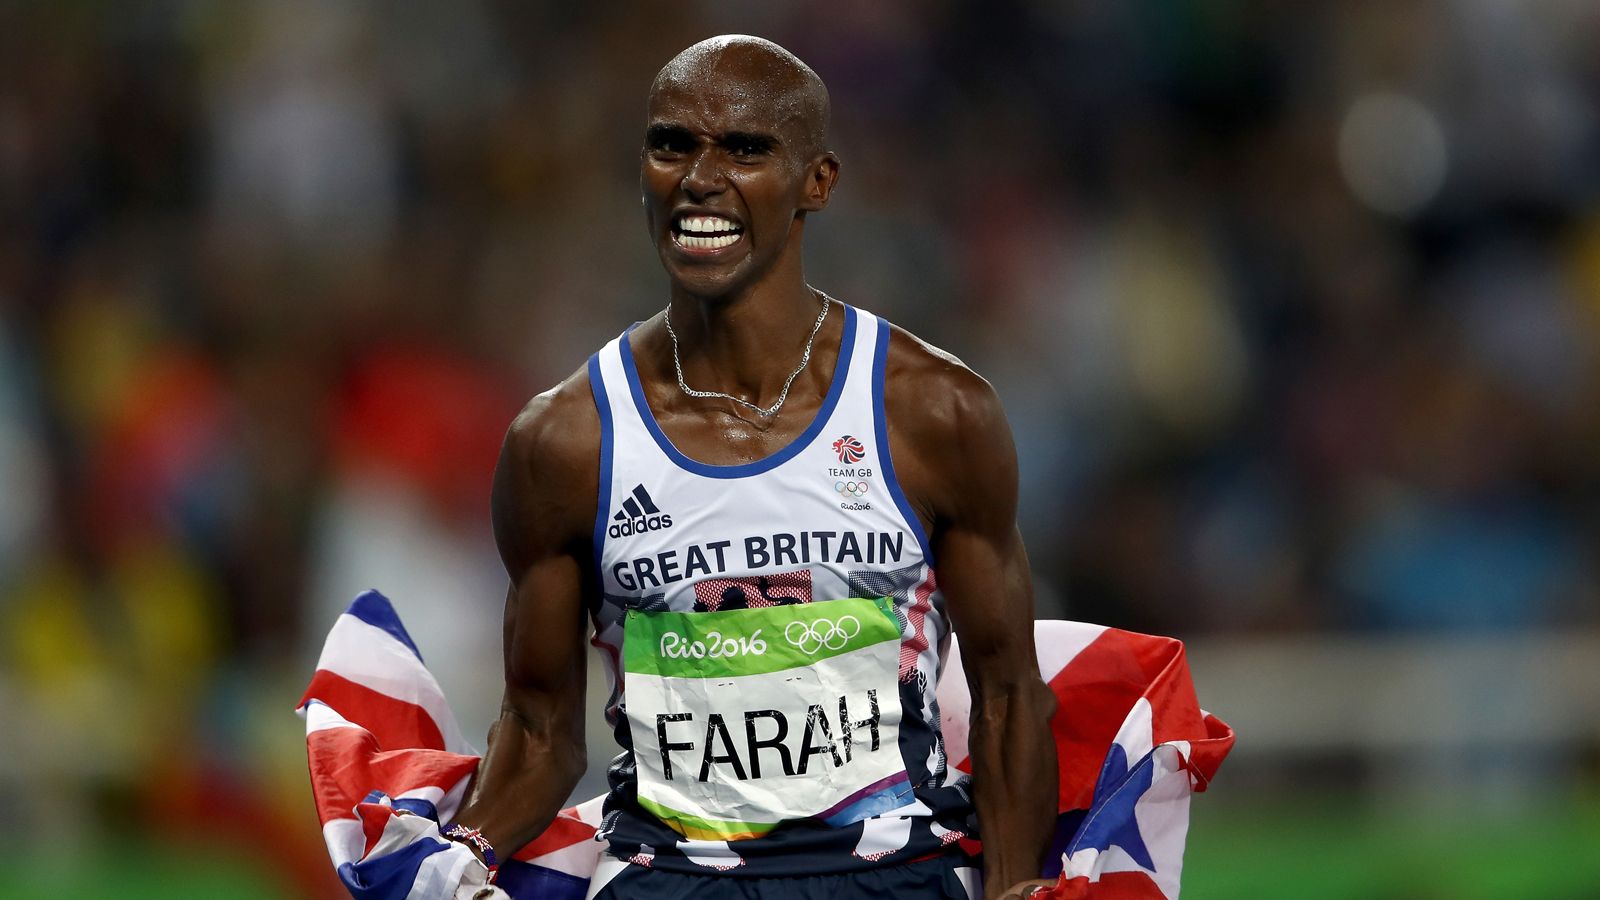 Inside Lines Marathon man Mo Farah on verge of running into a Scottish  storm  The Independent  The Independent